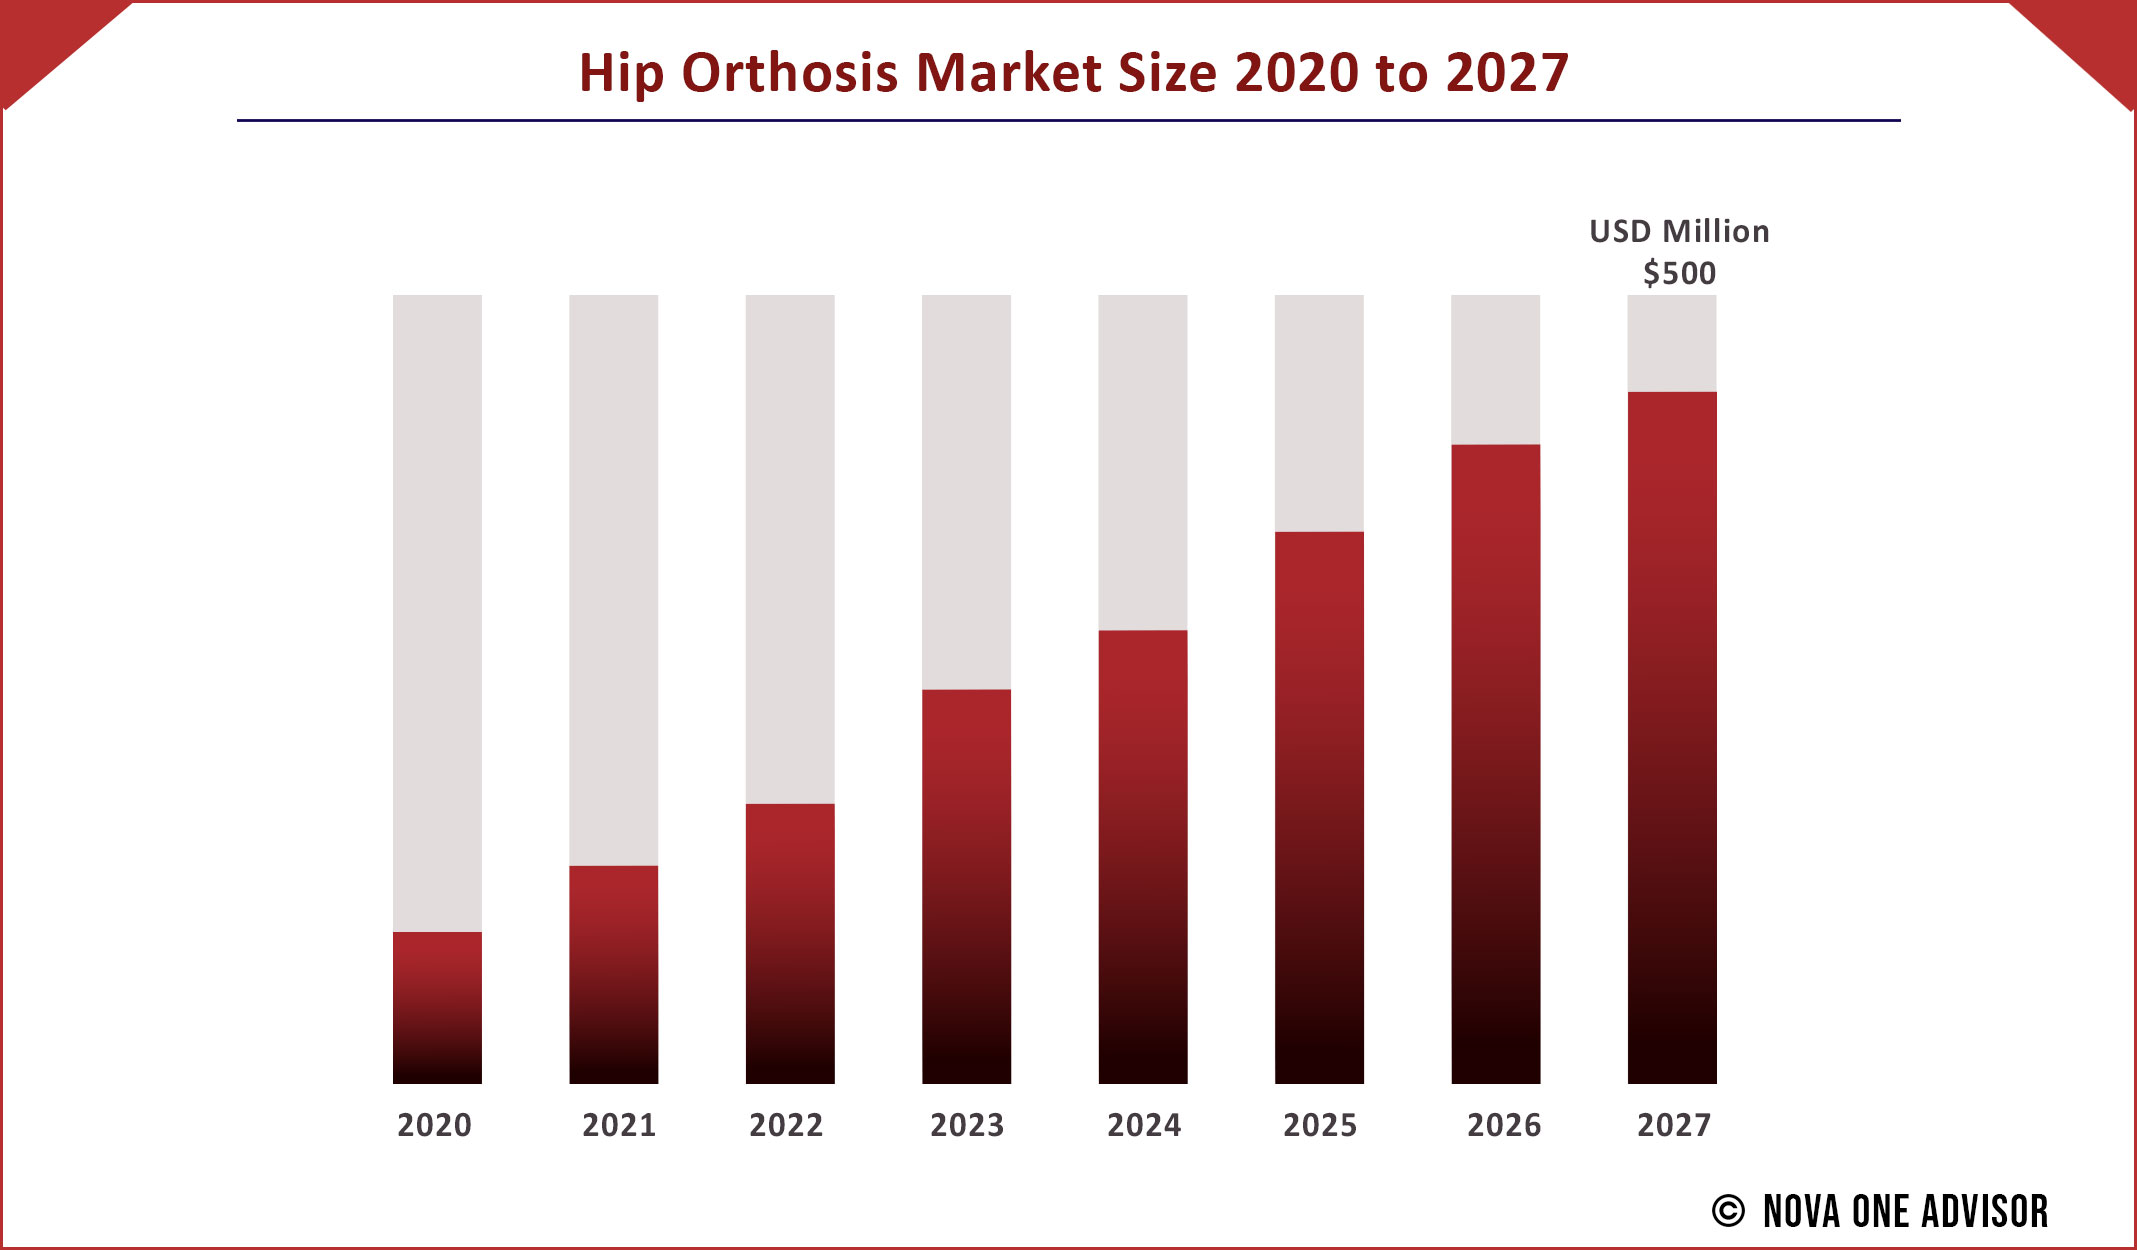 Hip Orthosis Market Size 2020 to 2027